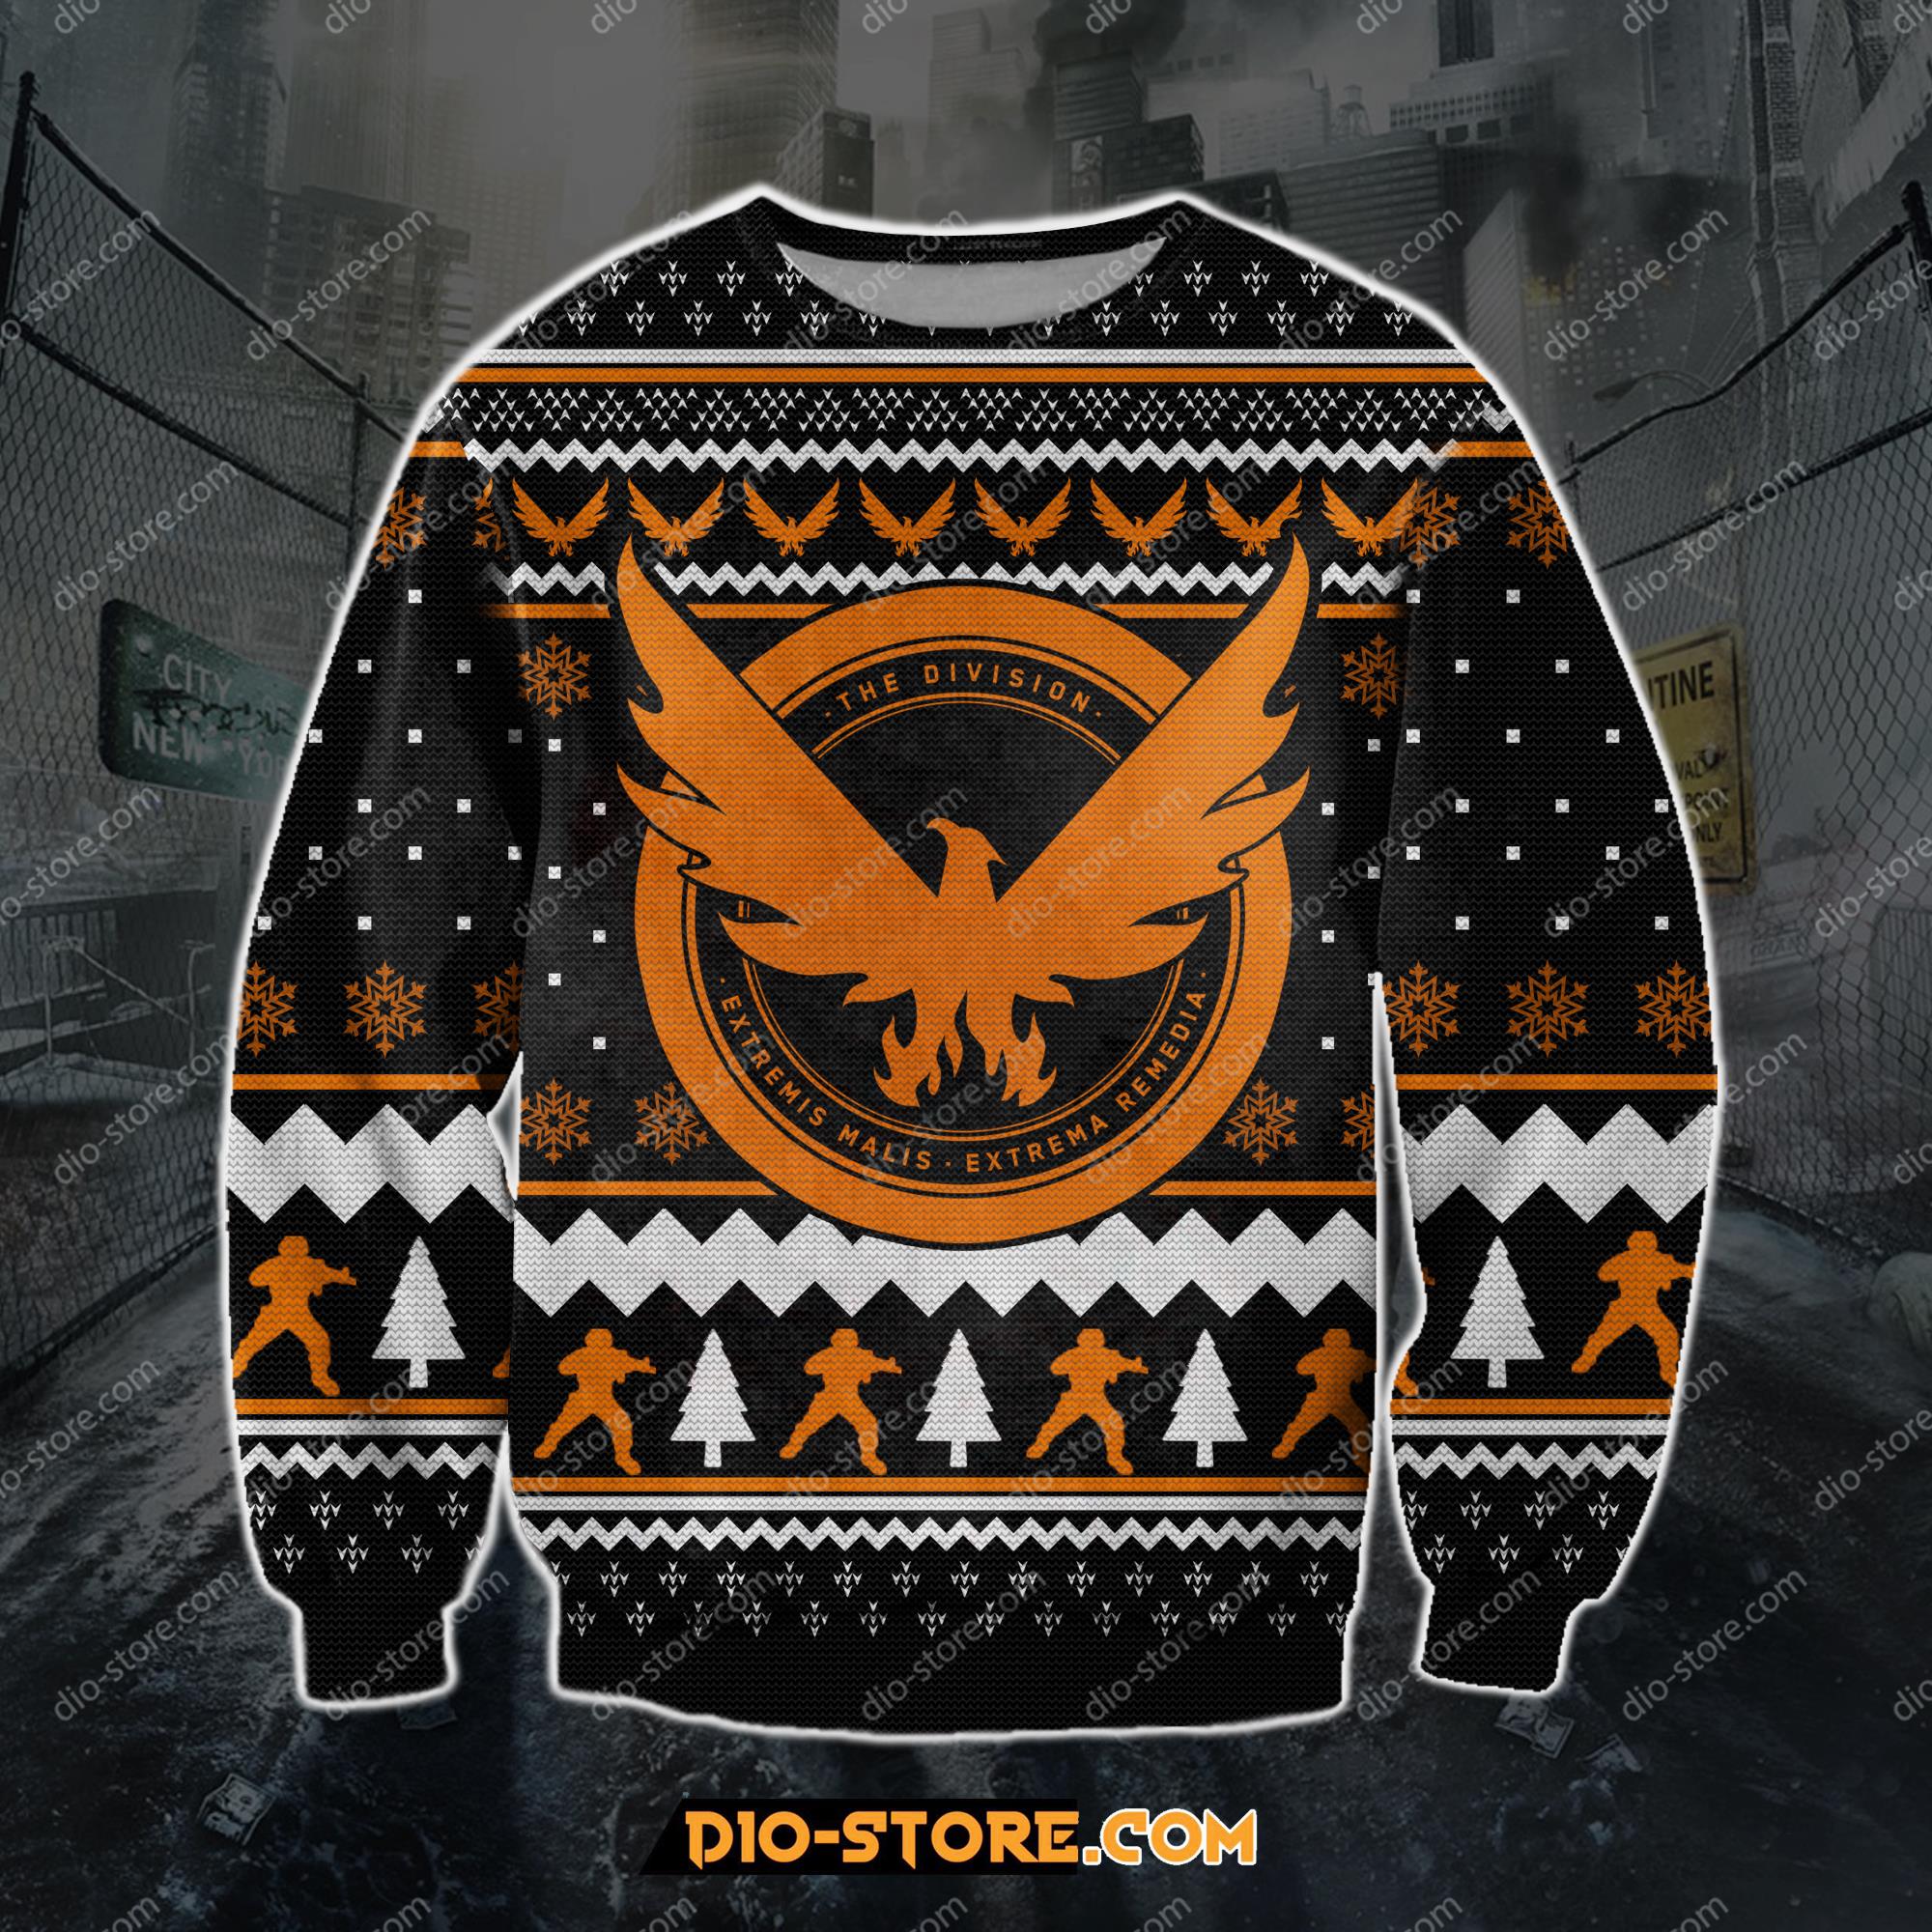 The Division Game 3D Print Ugly Christmas Sweatshirt Hoodie All Over Printed Cint10185